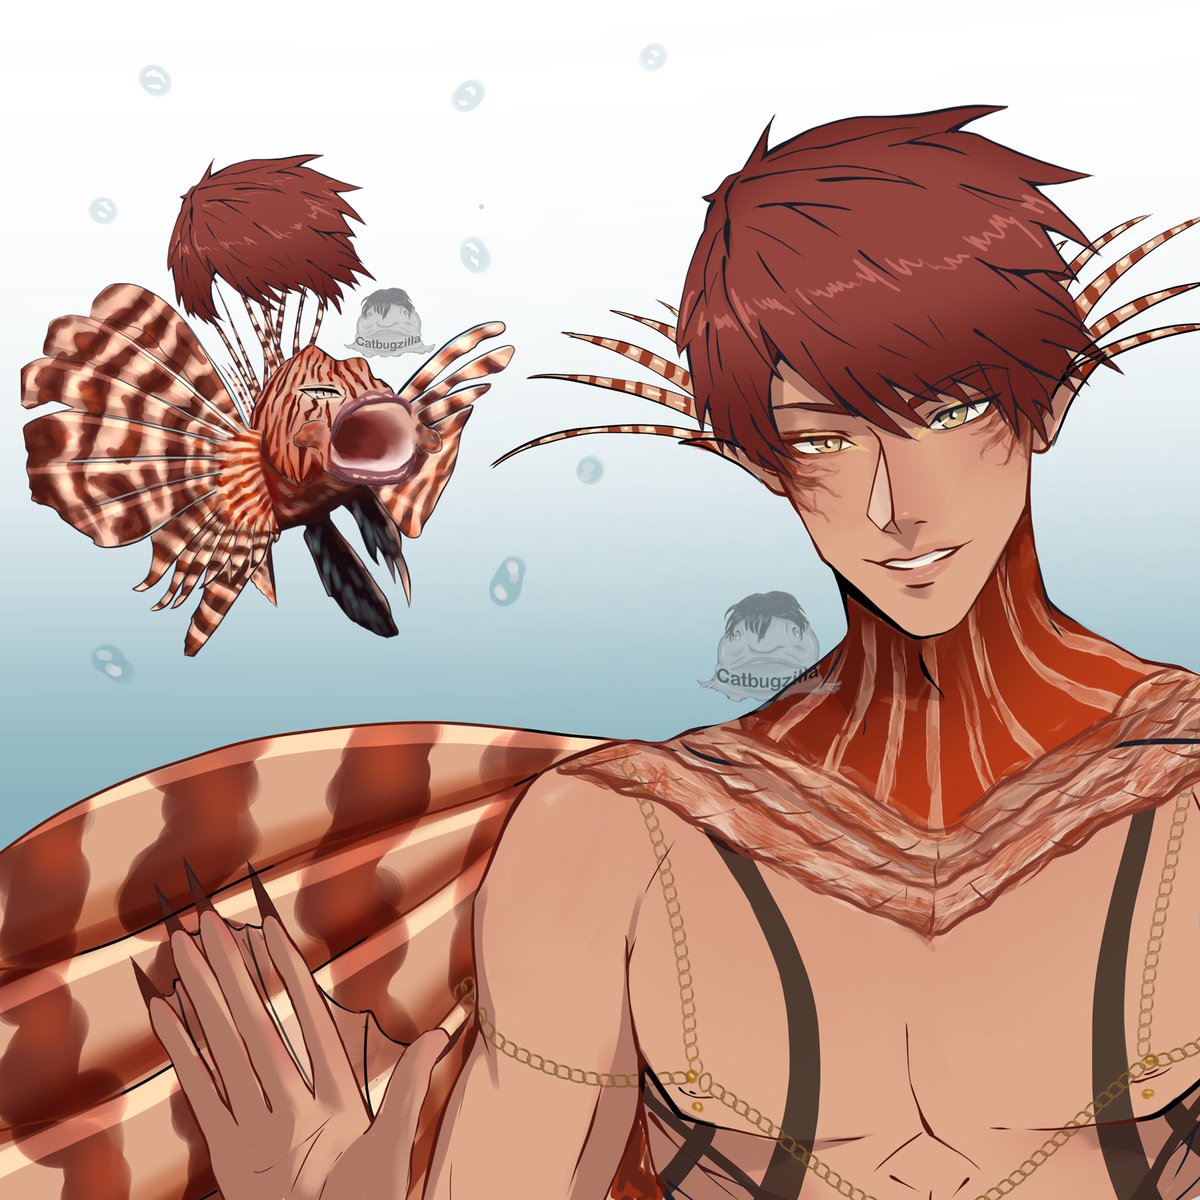 Lionfish Diavolo!

The way I laughed making this.

#obeyme #obeymefanart #obeymediavolo #obeymefish